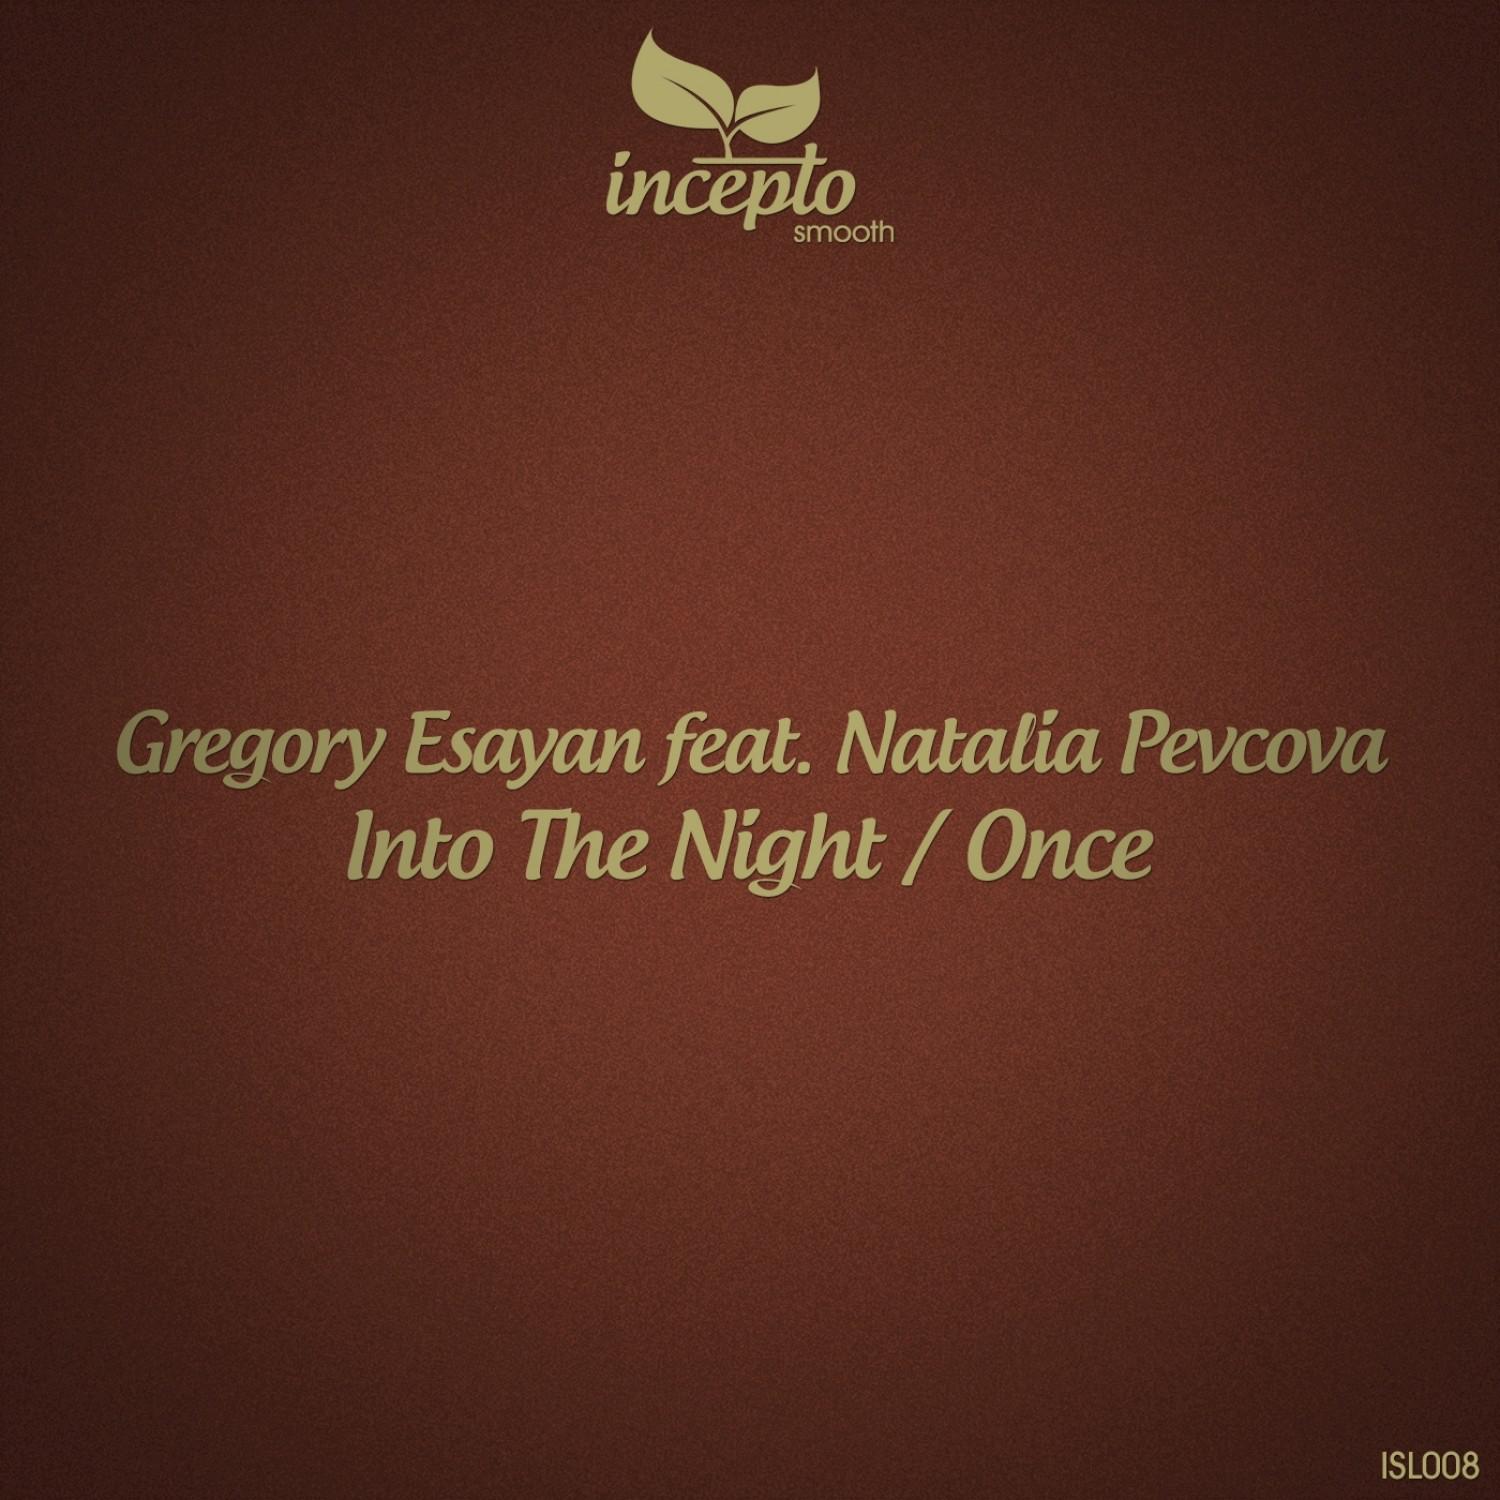 Into the Night / Once (feat. Natalia Pevcova)